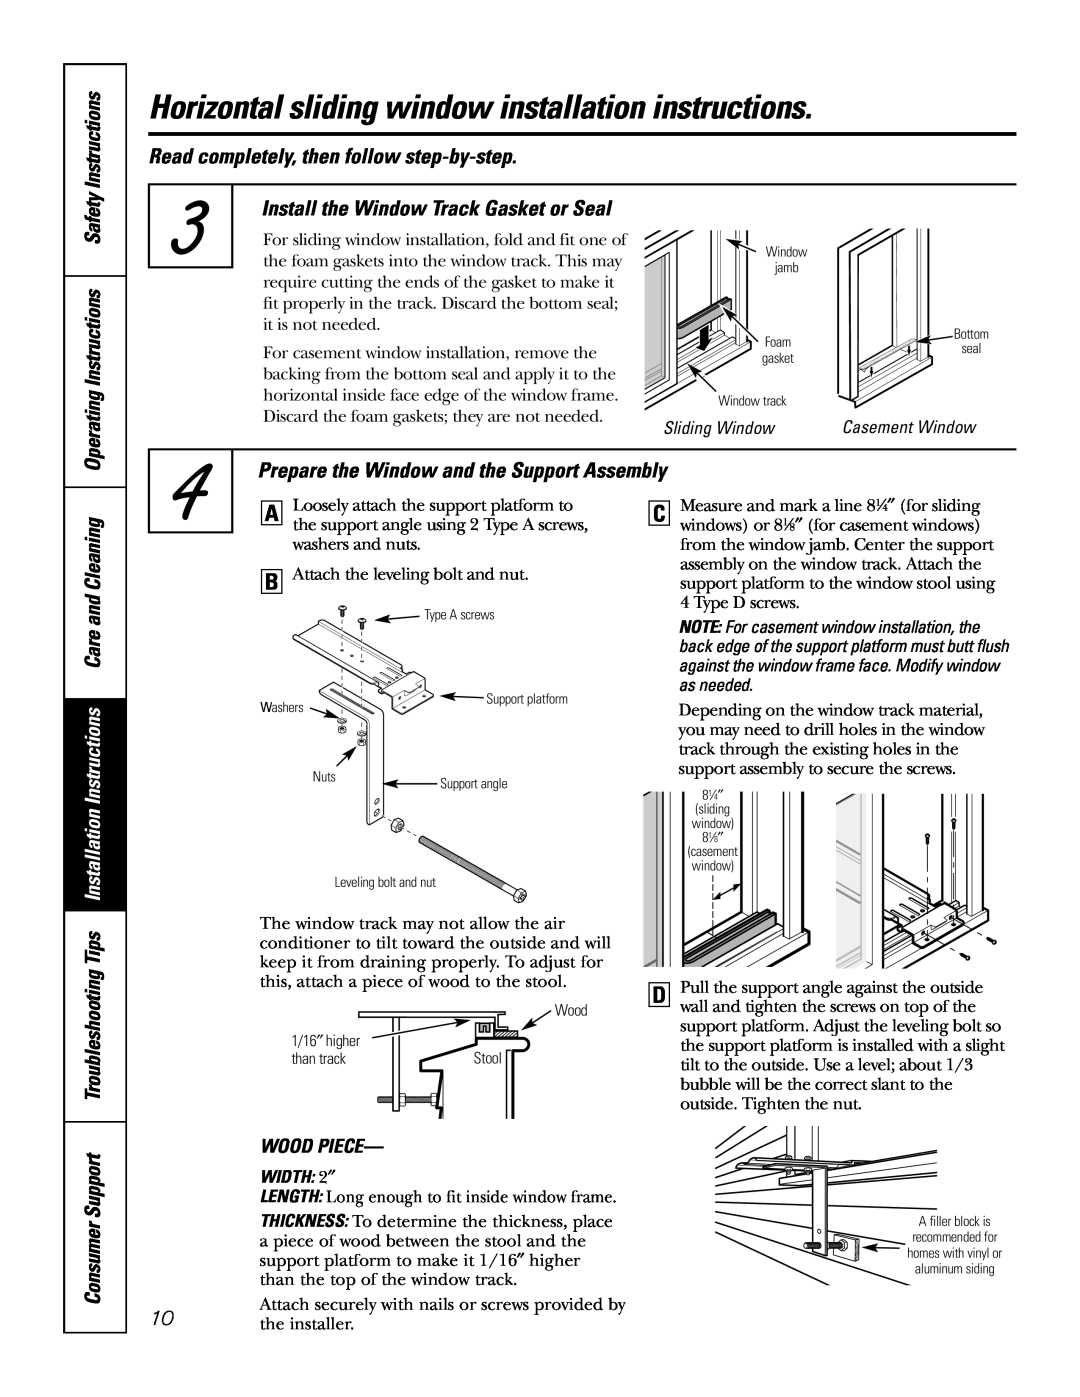 GE AGX08 AGX10 Instructions, Install the Window Track Gasket or Seal, Care and Cleaning, Installation, Consumer Support 